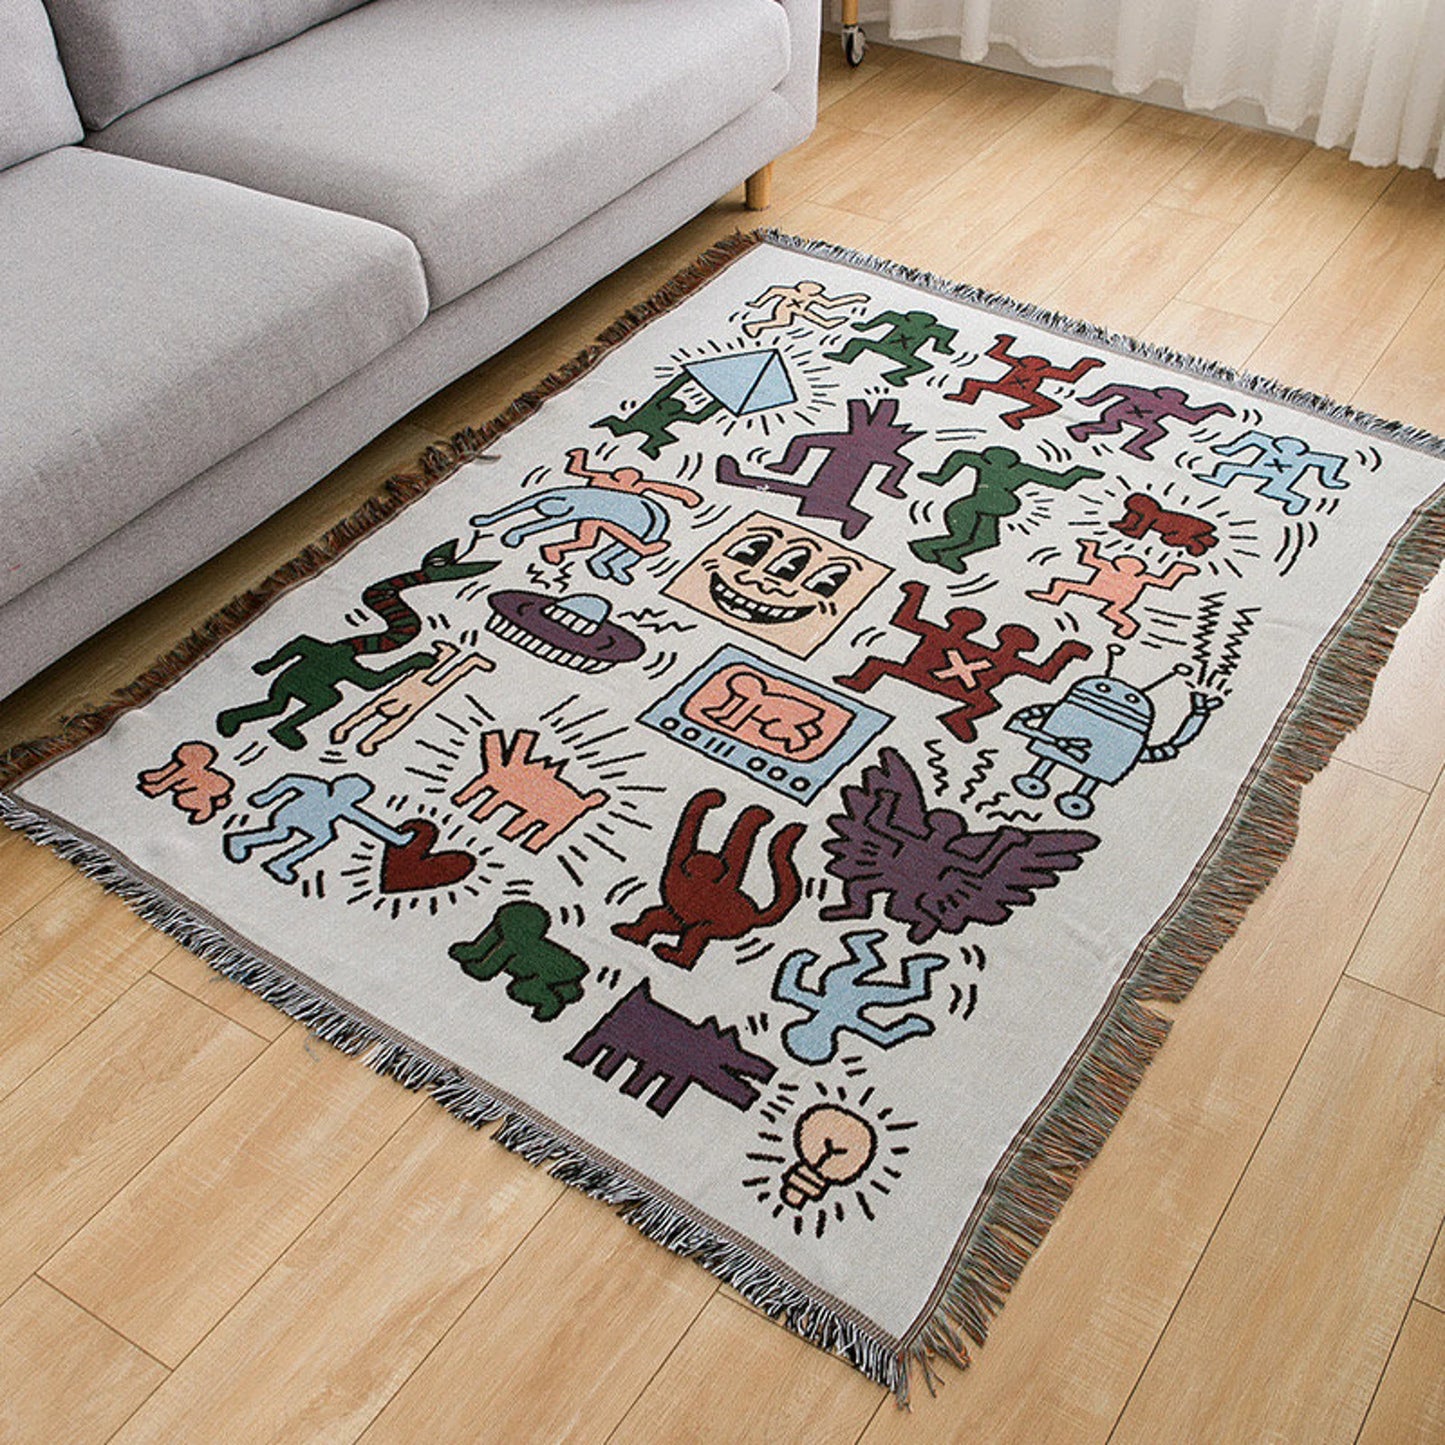 Woven Blanket Keith Haring Characters